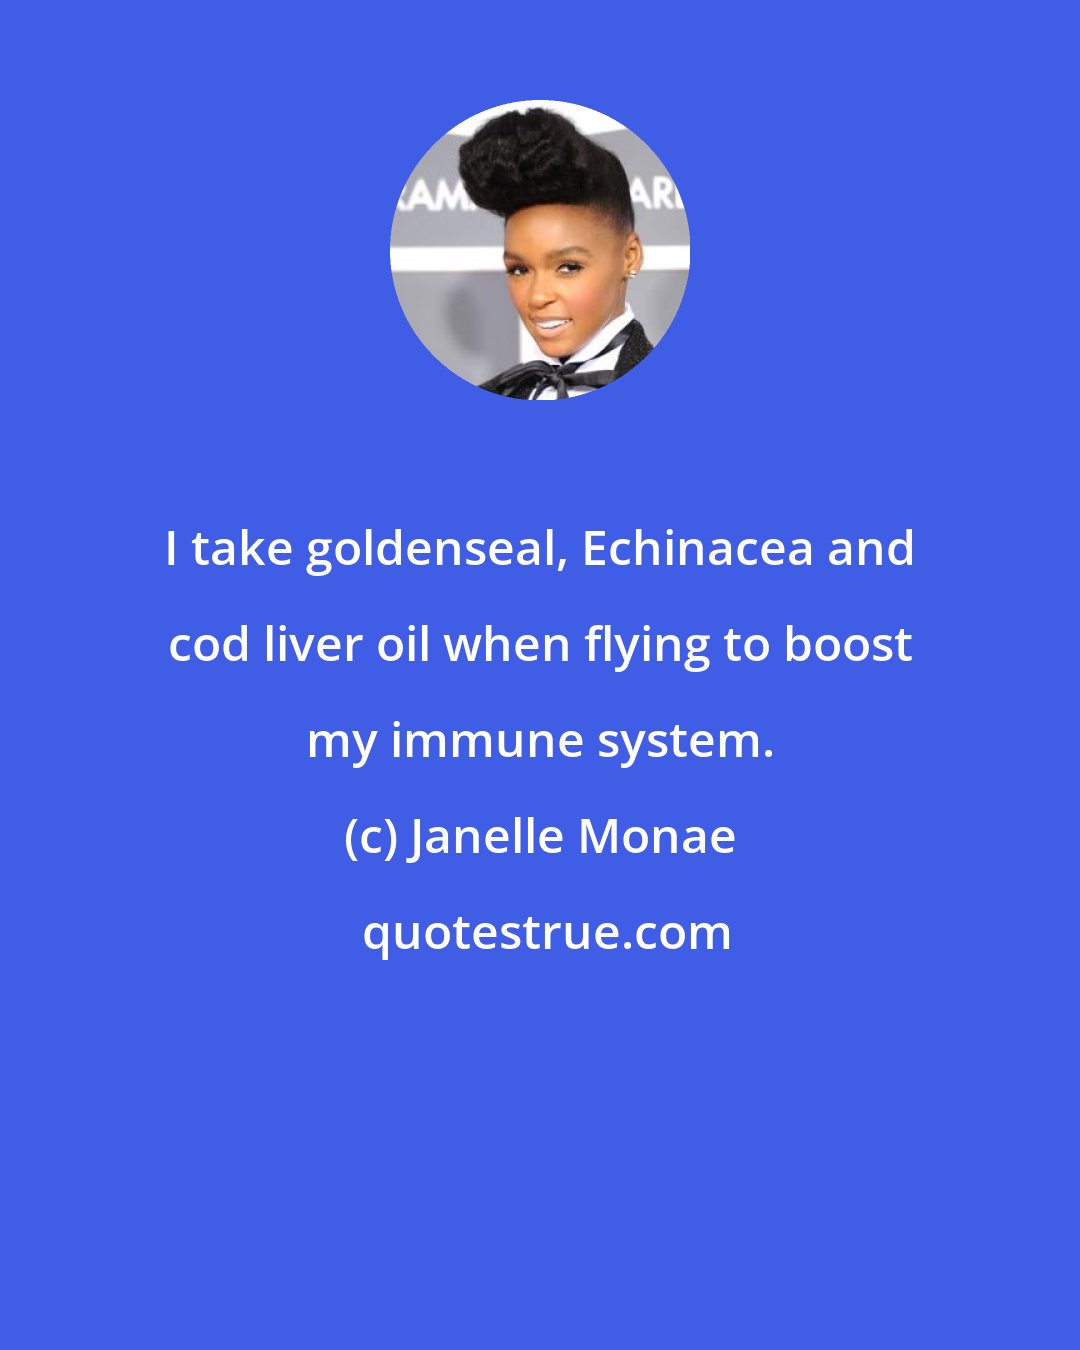 Janelle Monae: I take goldenseal, Echinacea and cod liver oil when flying to boost my immune system.